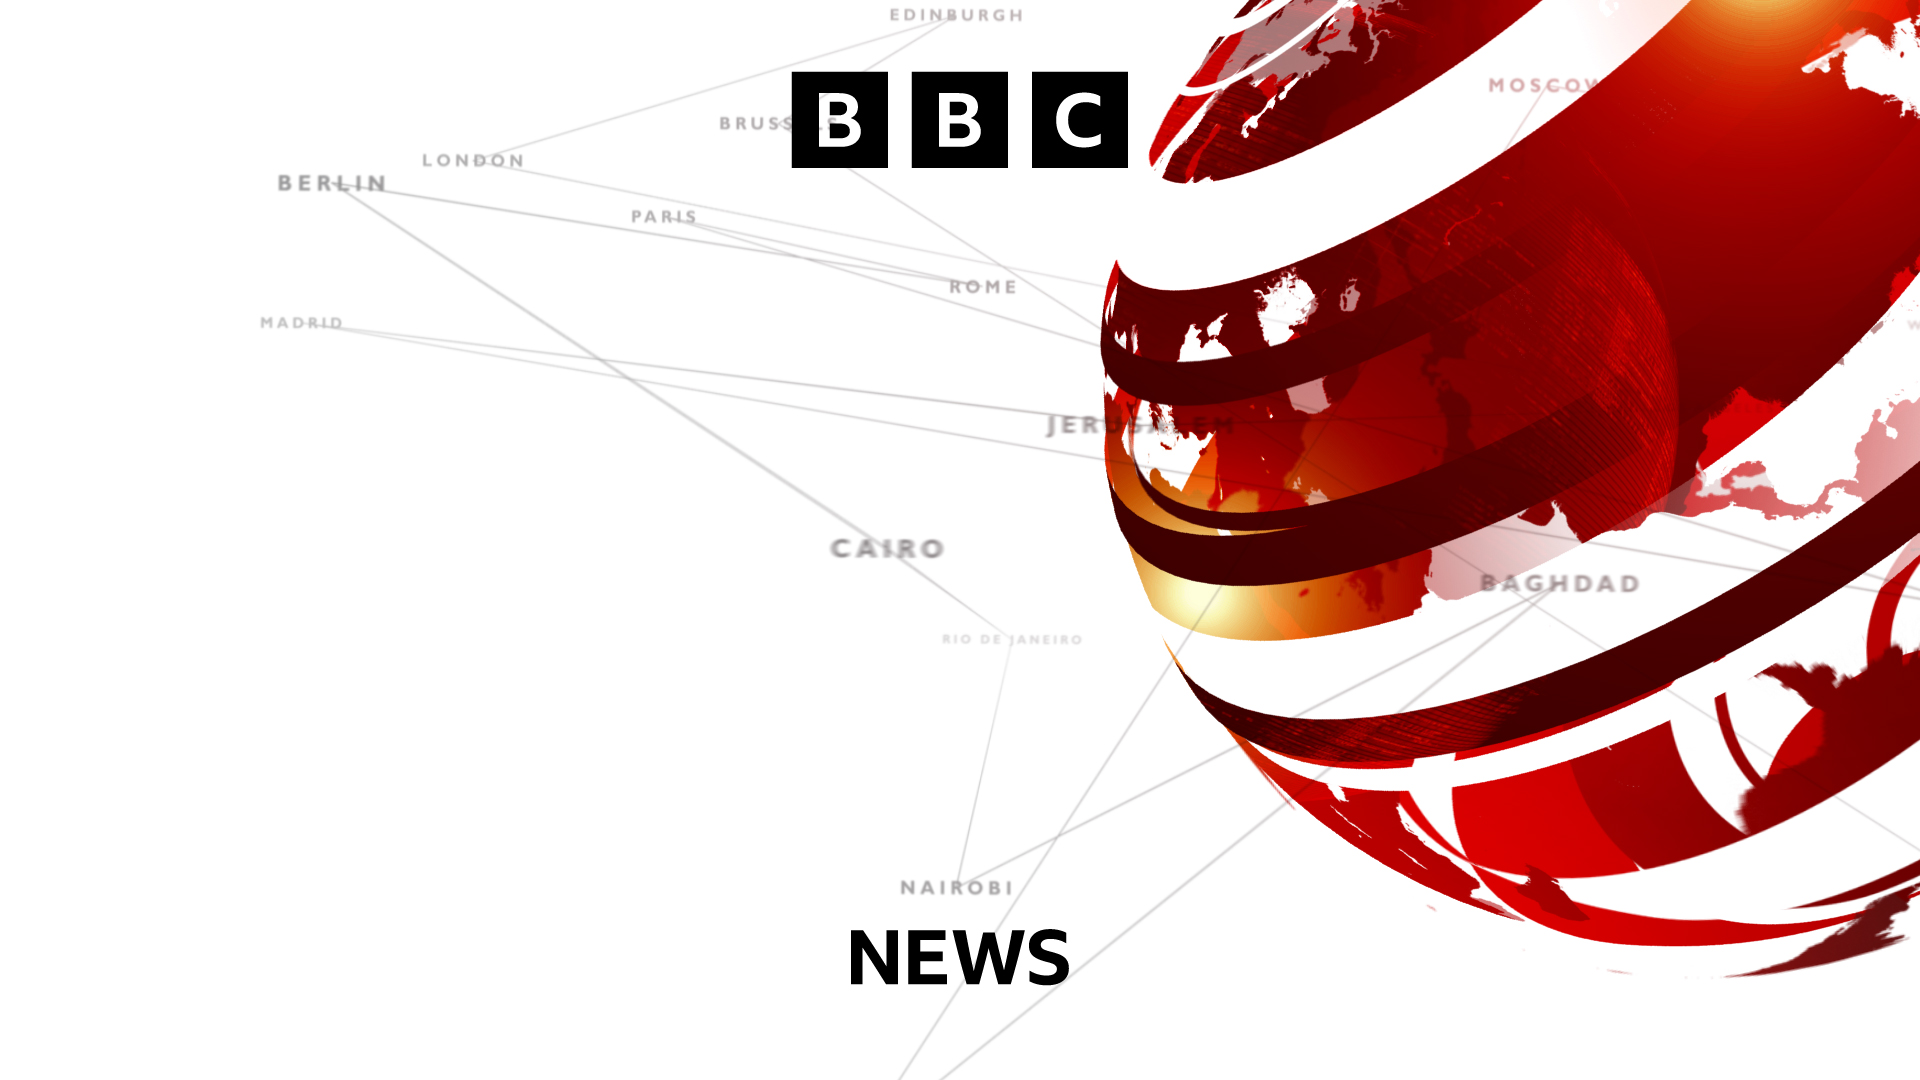 Tune into BBC News: The Context airing on your local public television station!